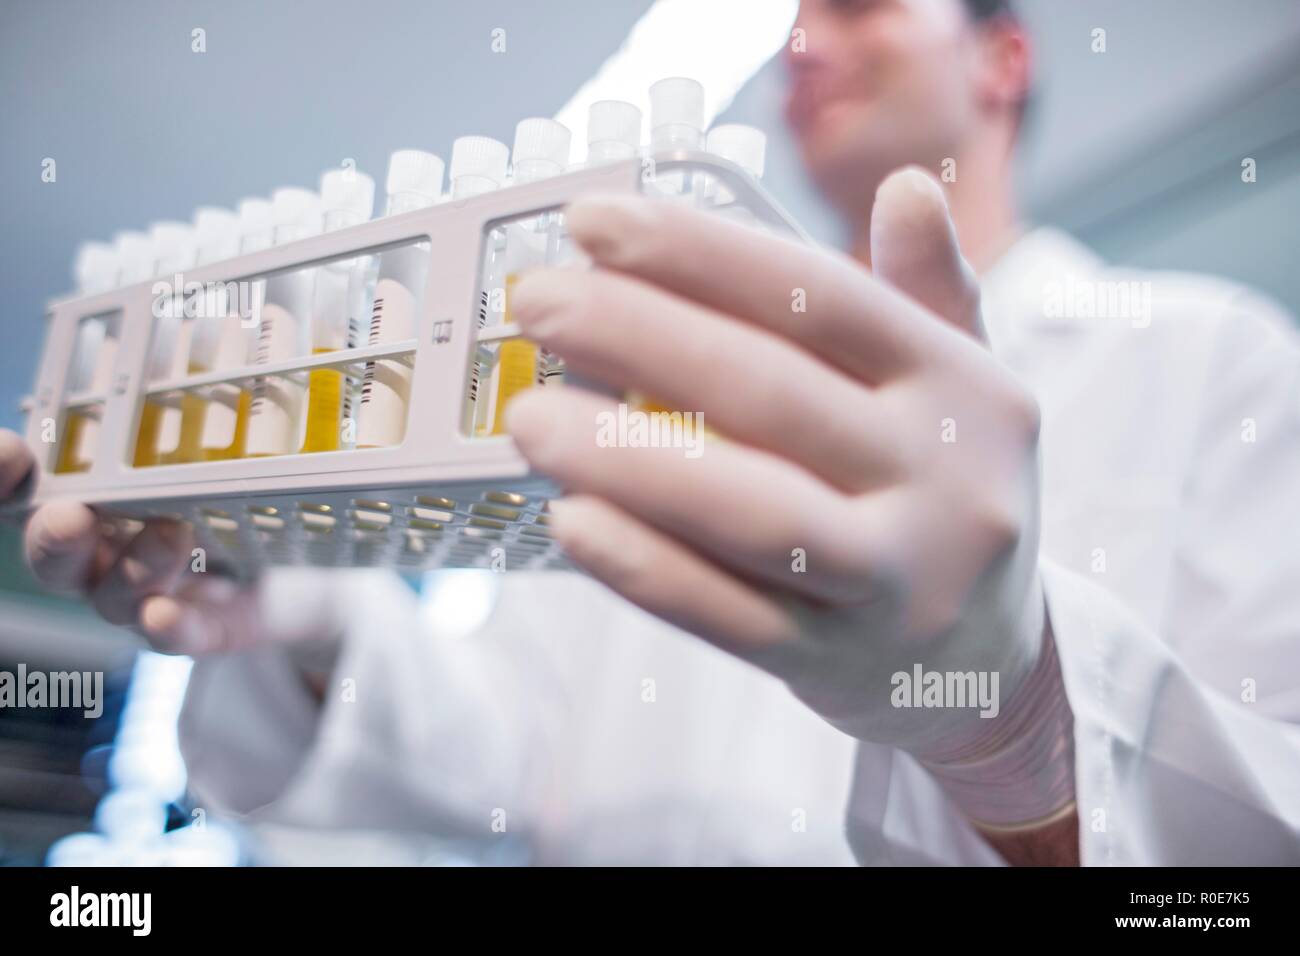 Laboratory assistant holding medical samples in rack. Stock Photo